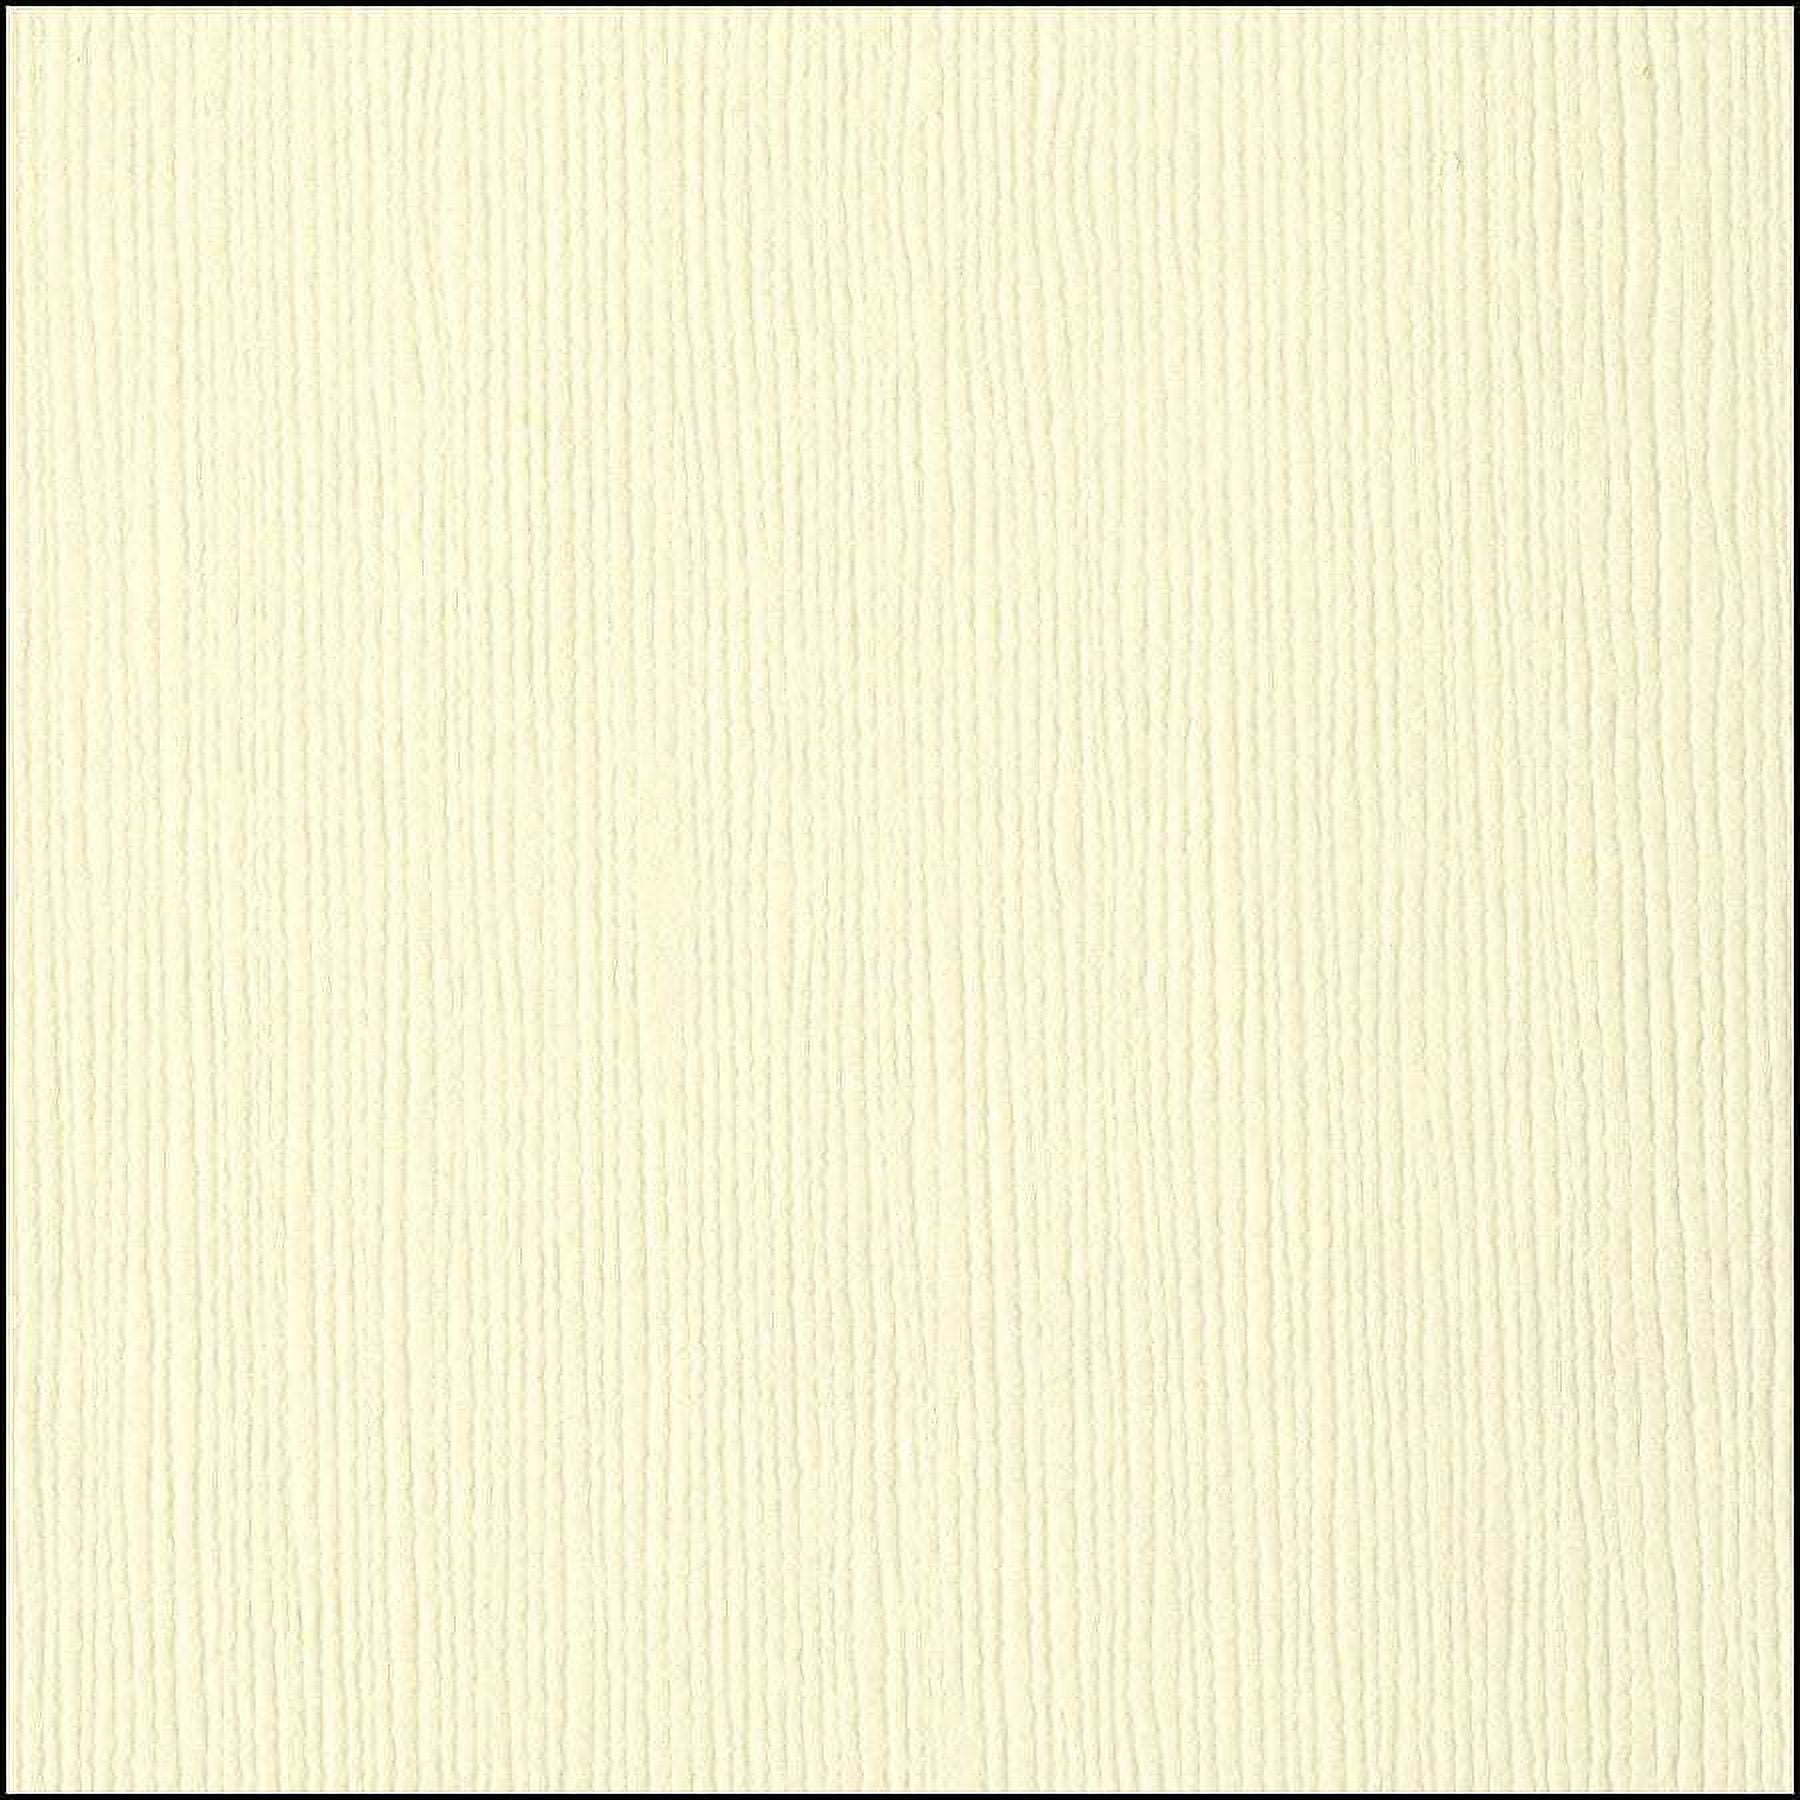 Bazzill Cardstock - Pebble Beach 12x12 (smooth speckled)